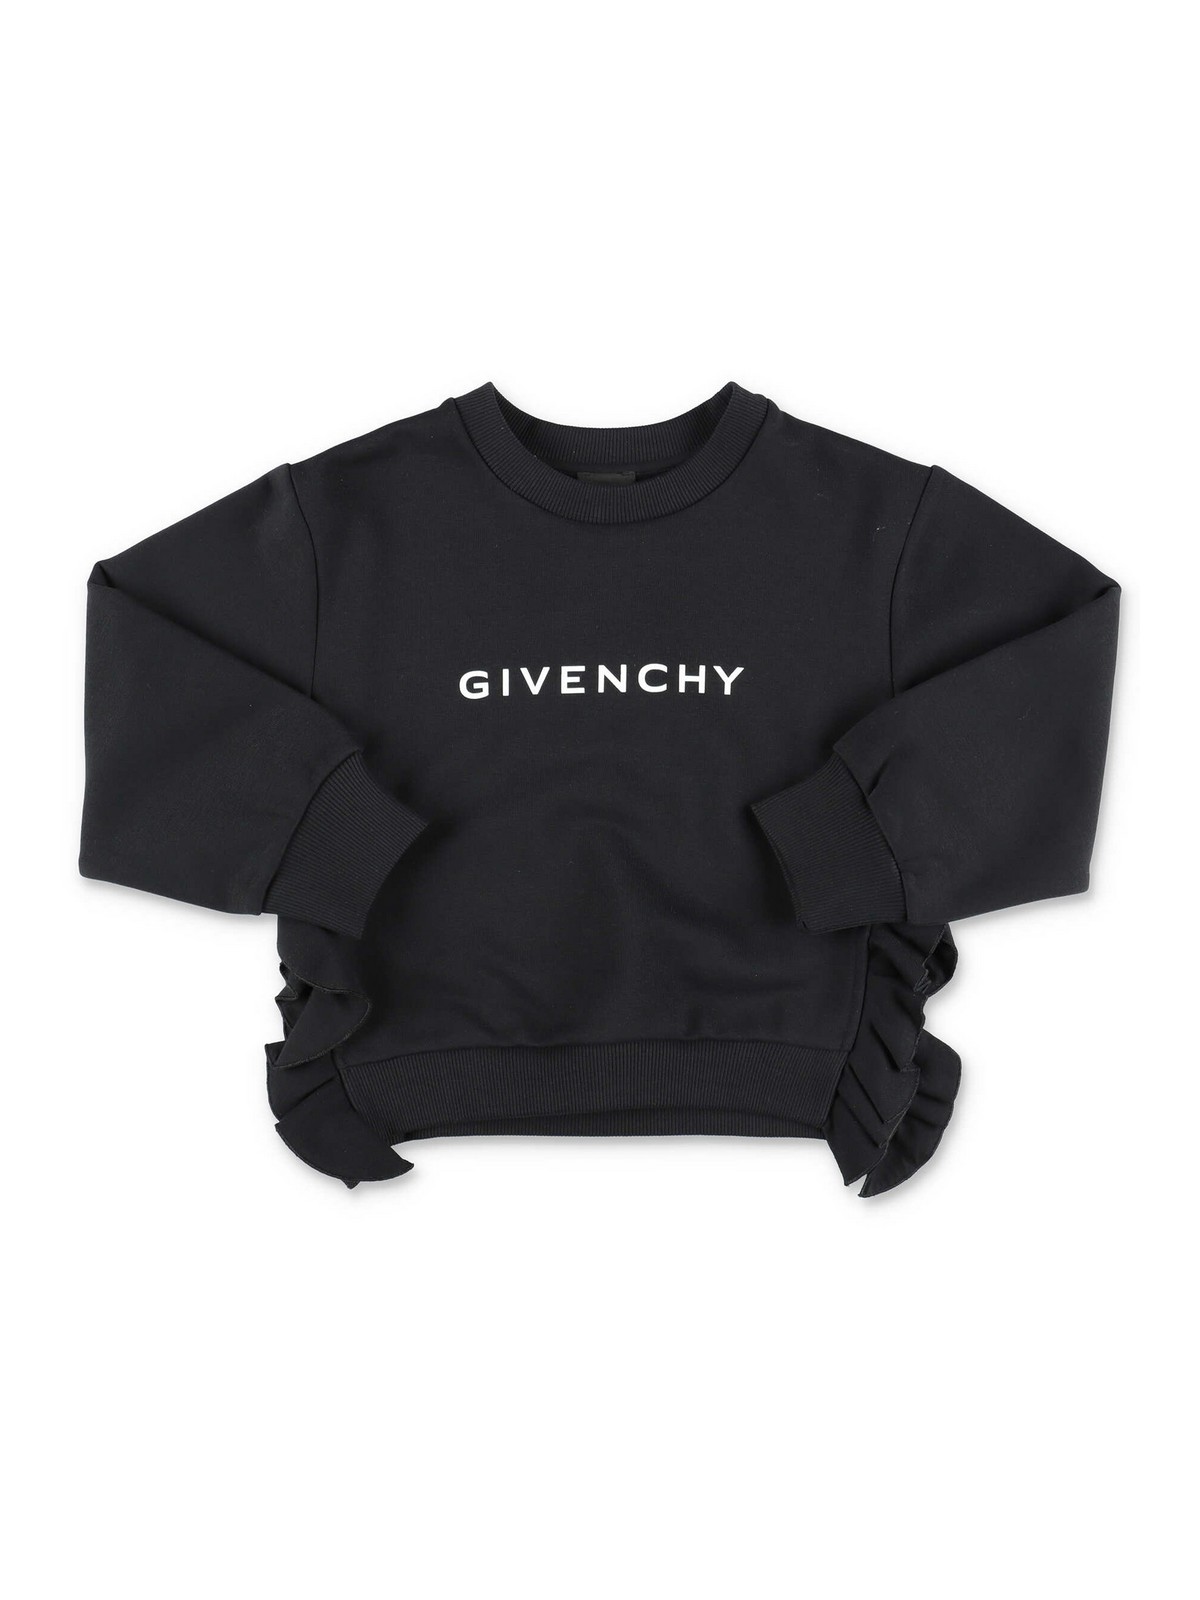 Black Cotton Sweatshirt by Givenchy on Sale